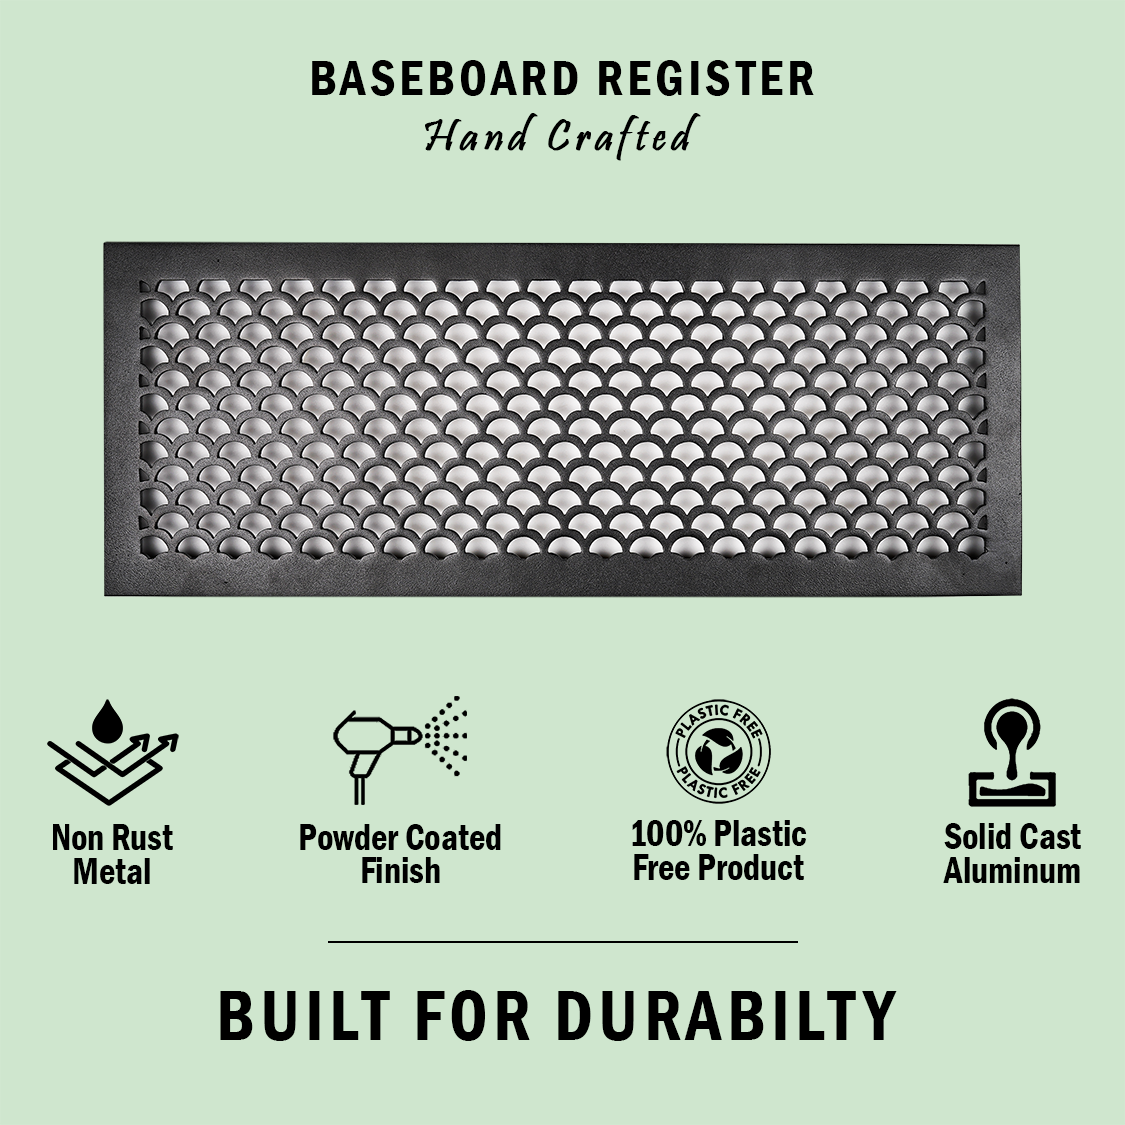 Scallop BASEBOARD 6"x30" Duct opening Solid Cast Aluminum Grill Vent Cover | Powder Coated